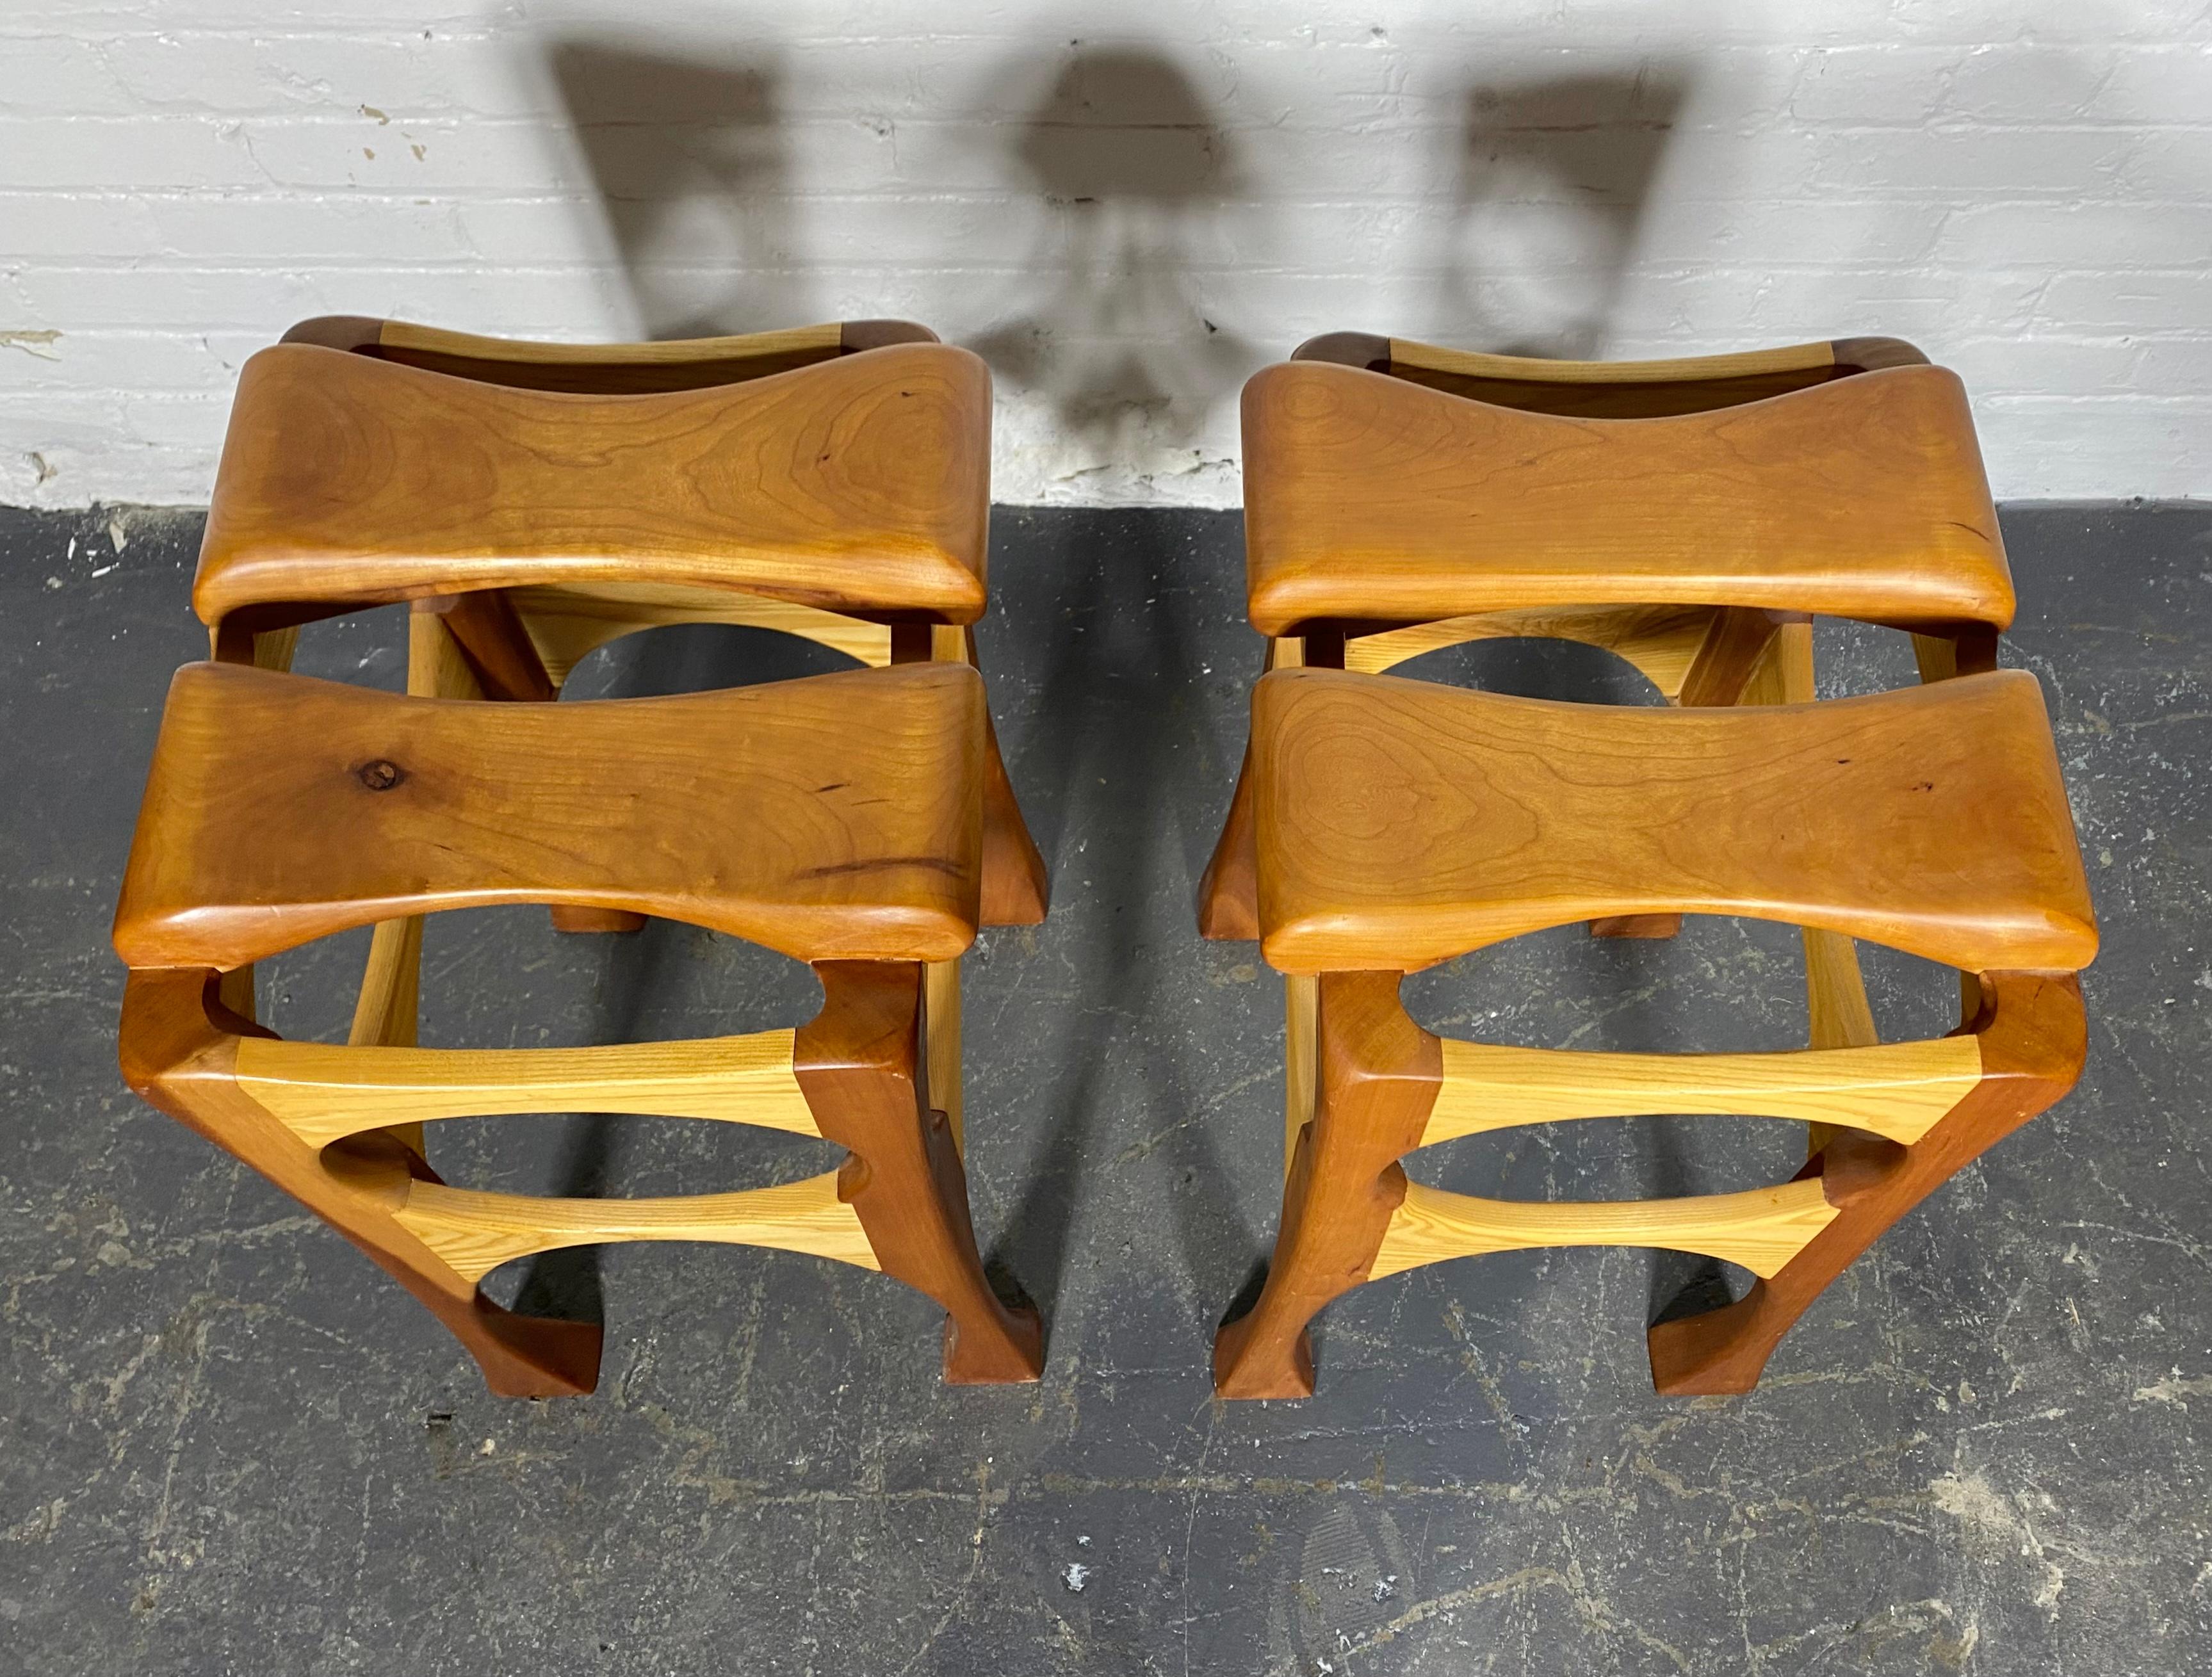 Birch Hand Crafted Bespoke Workshop/Studio Stools.  2-tone birch and cherry  For Sale